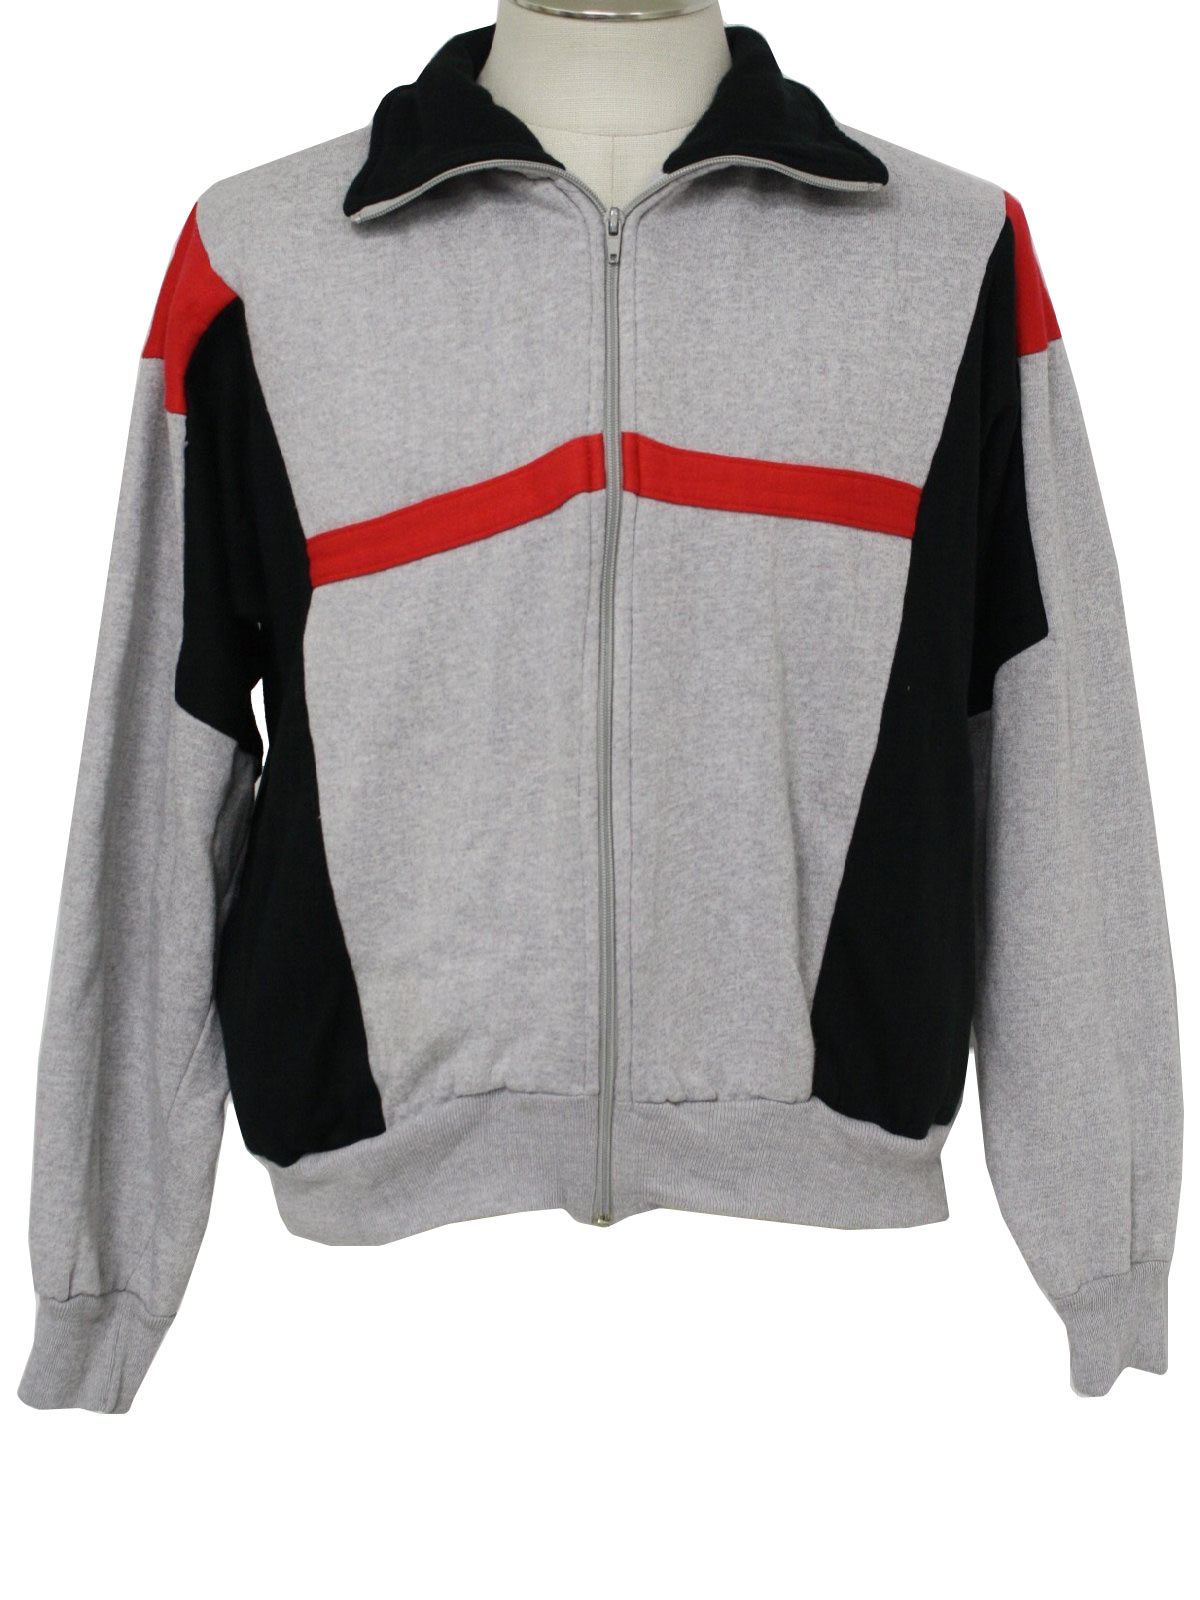 Retro 80s Jacket (Line Up) : 80s -Line Up- Mens grey, black, and red ...